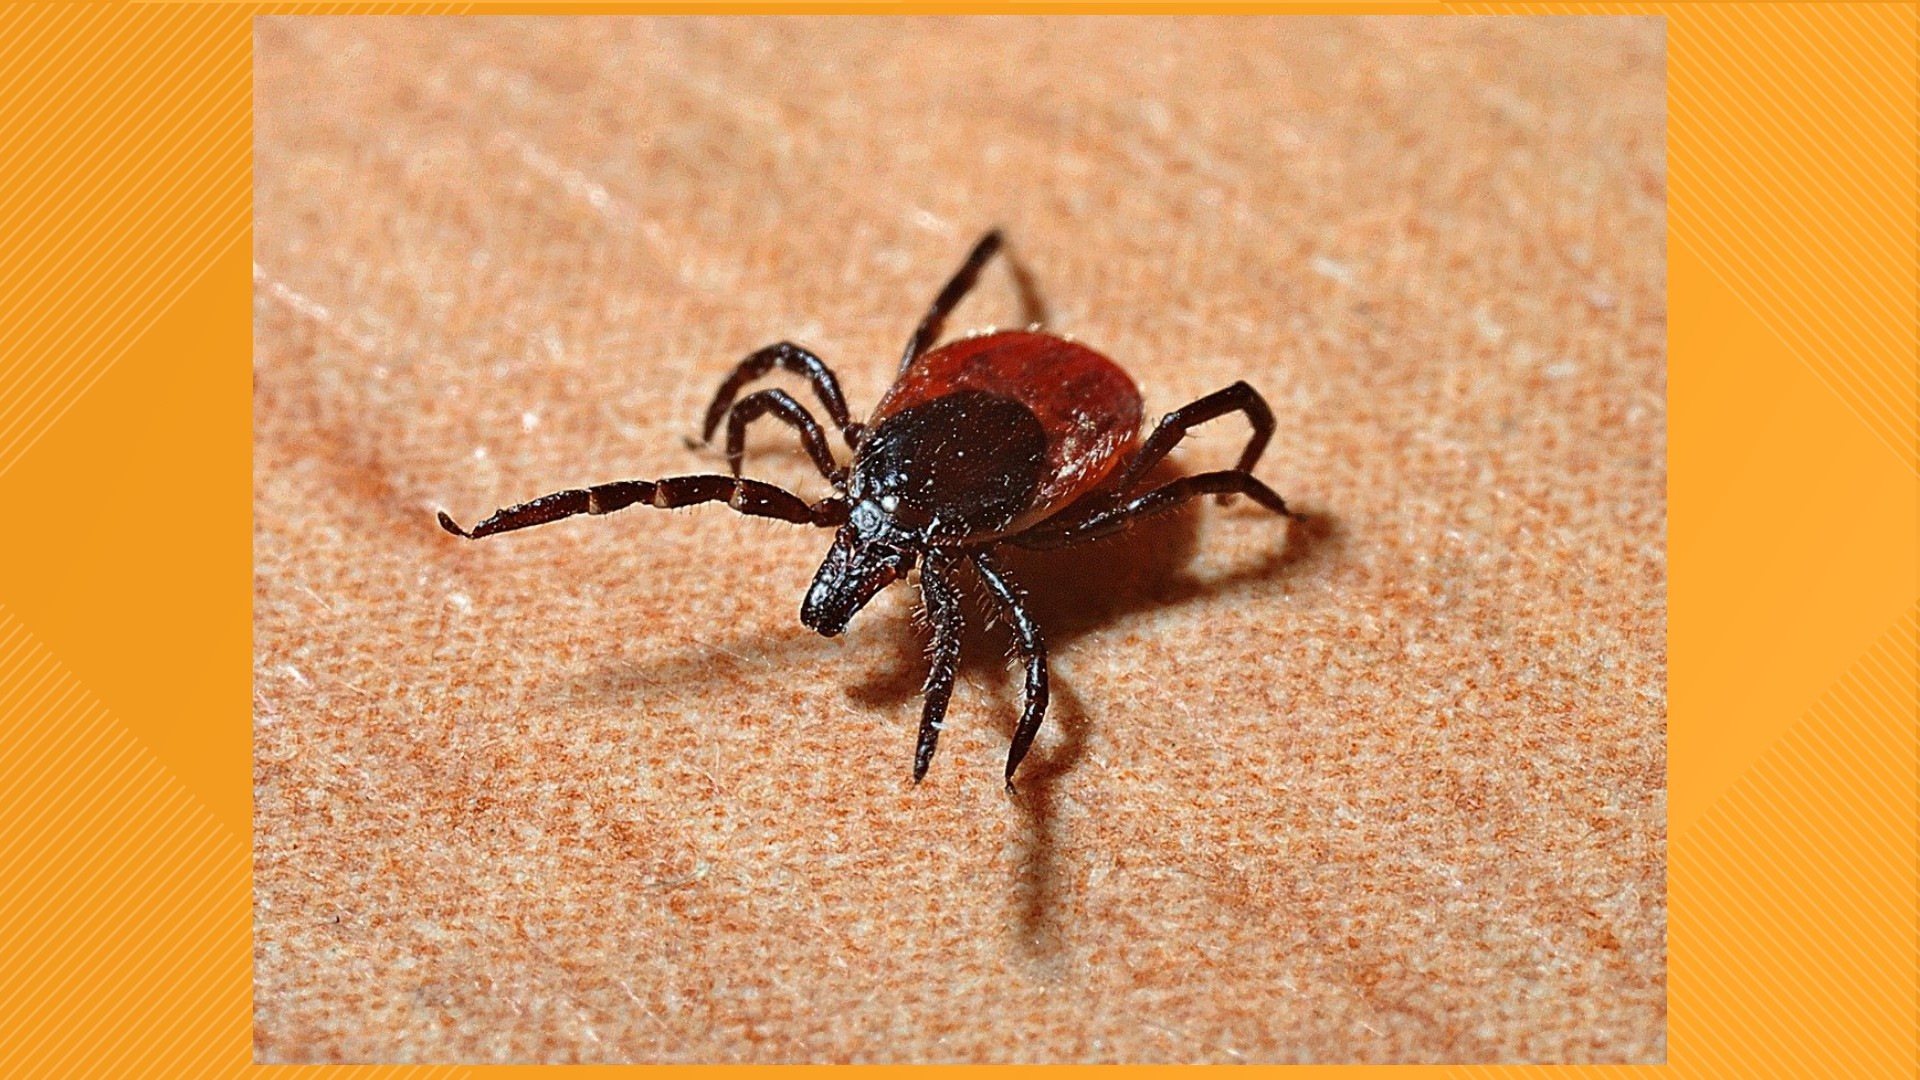 As the heat rises, so does the tick population. Here are helpful hints to prevent Lyme disease.